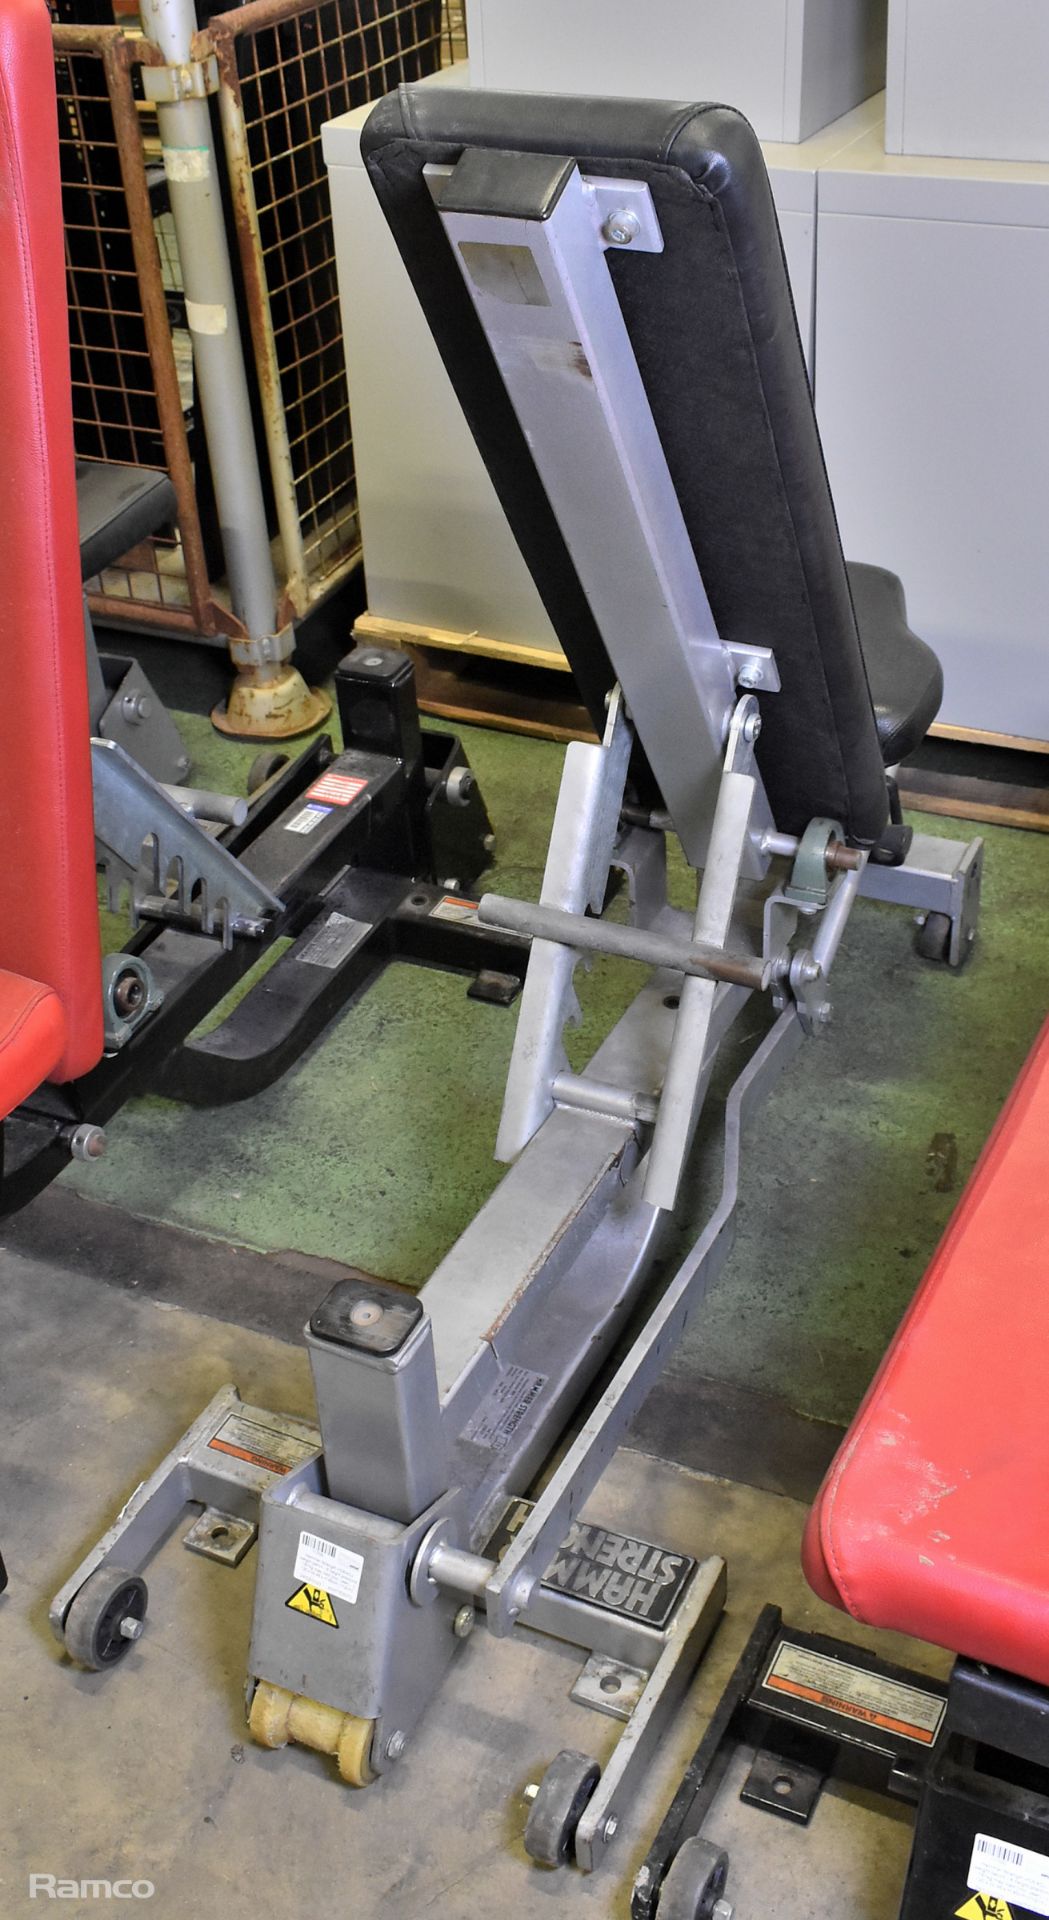 Hammer Strength HDEADJ weight bench - 6 height positions - 181 kg max load (incl. user) - Image 2 of 5